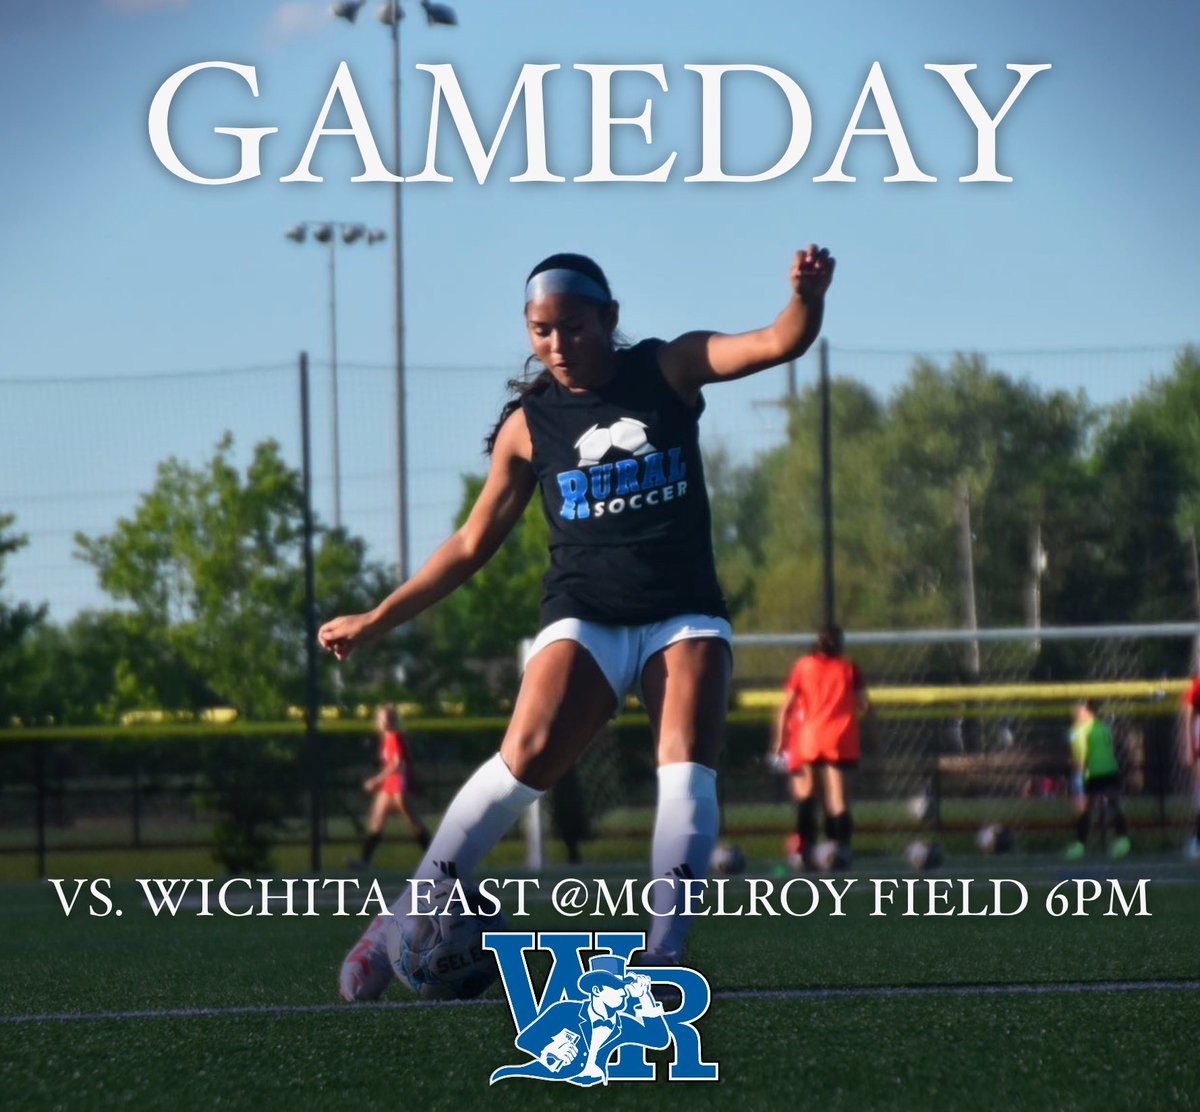 Can’t wait for Class 6A Regional Championship game. Vamos Lady Blues! Let’s get the win again today! 💪🏽🔥  @RuralSoccer  
 @SBV09_ECNL @SBV_ECNL @SPORTINGBV @ECNLgirls 
@ImCollegeSoccer @ImYouthSoccer @TopDrawerSoccer @TheSoccerWire  @TheECNL
@SSN_NCAASoccer @SoccerMomInt